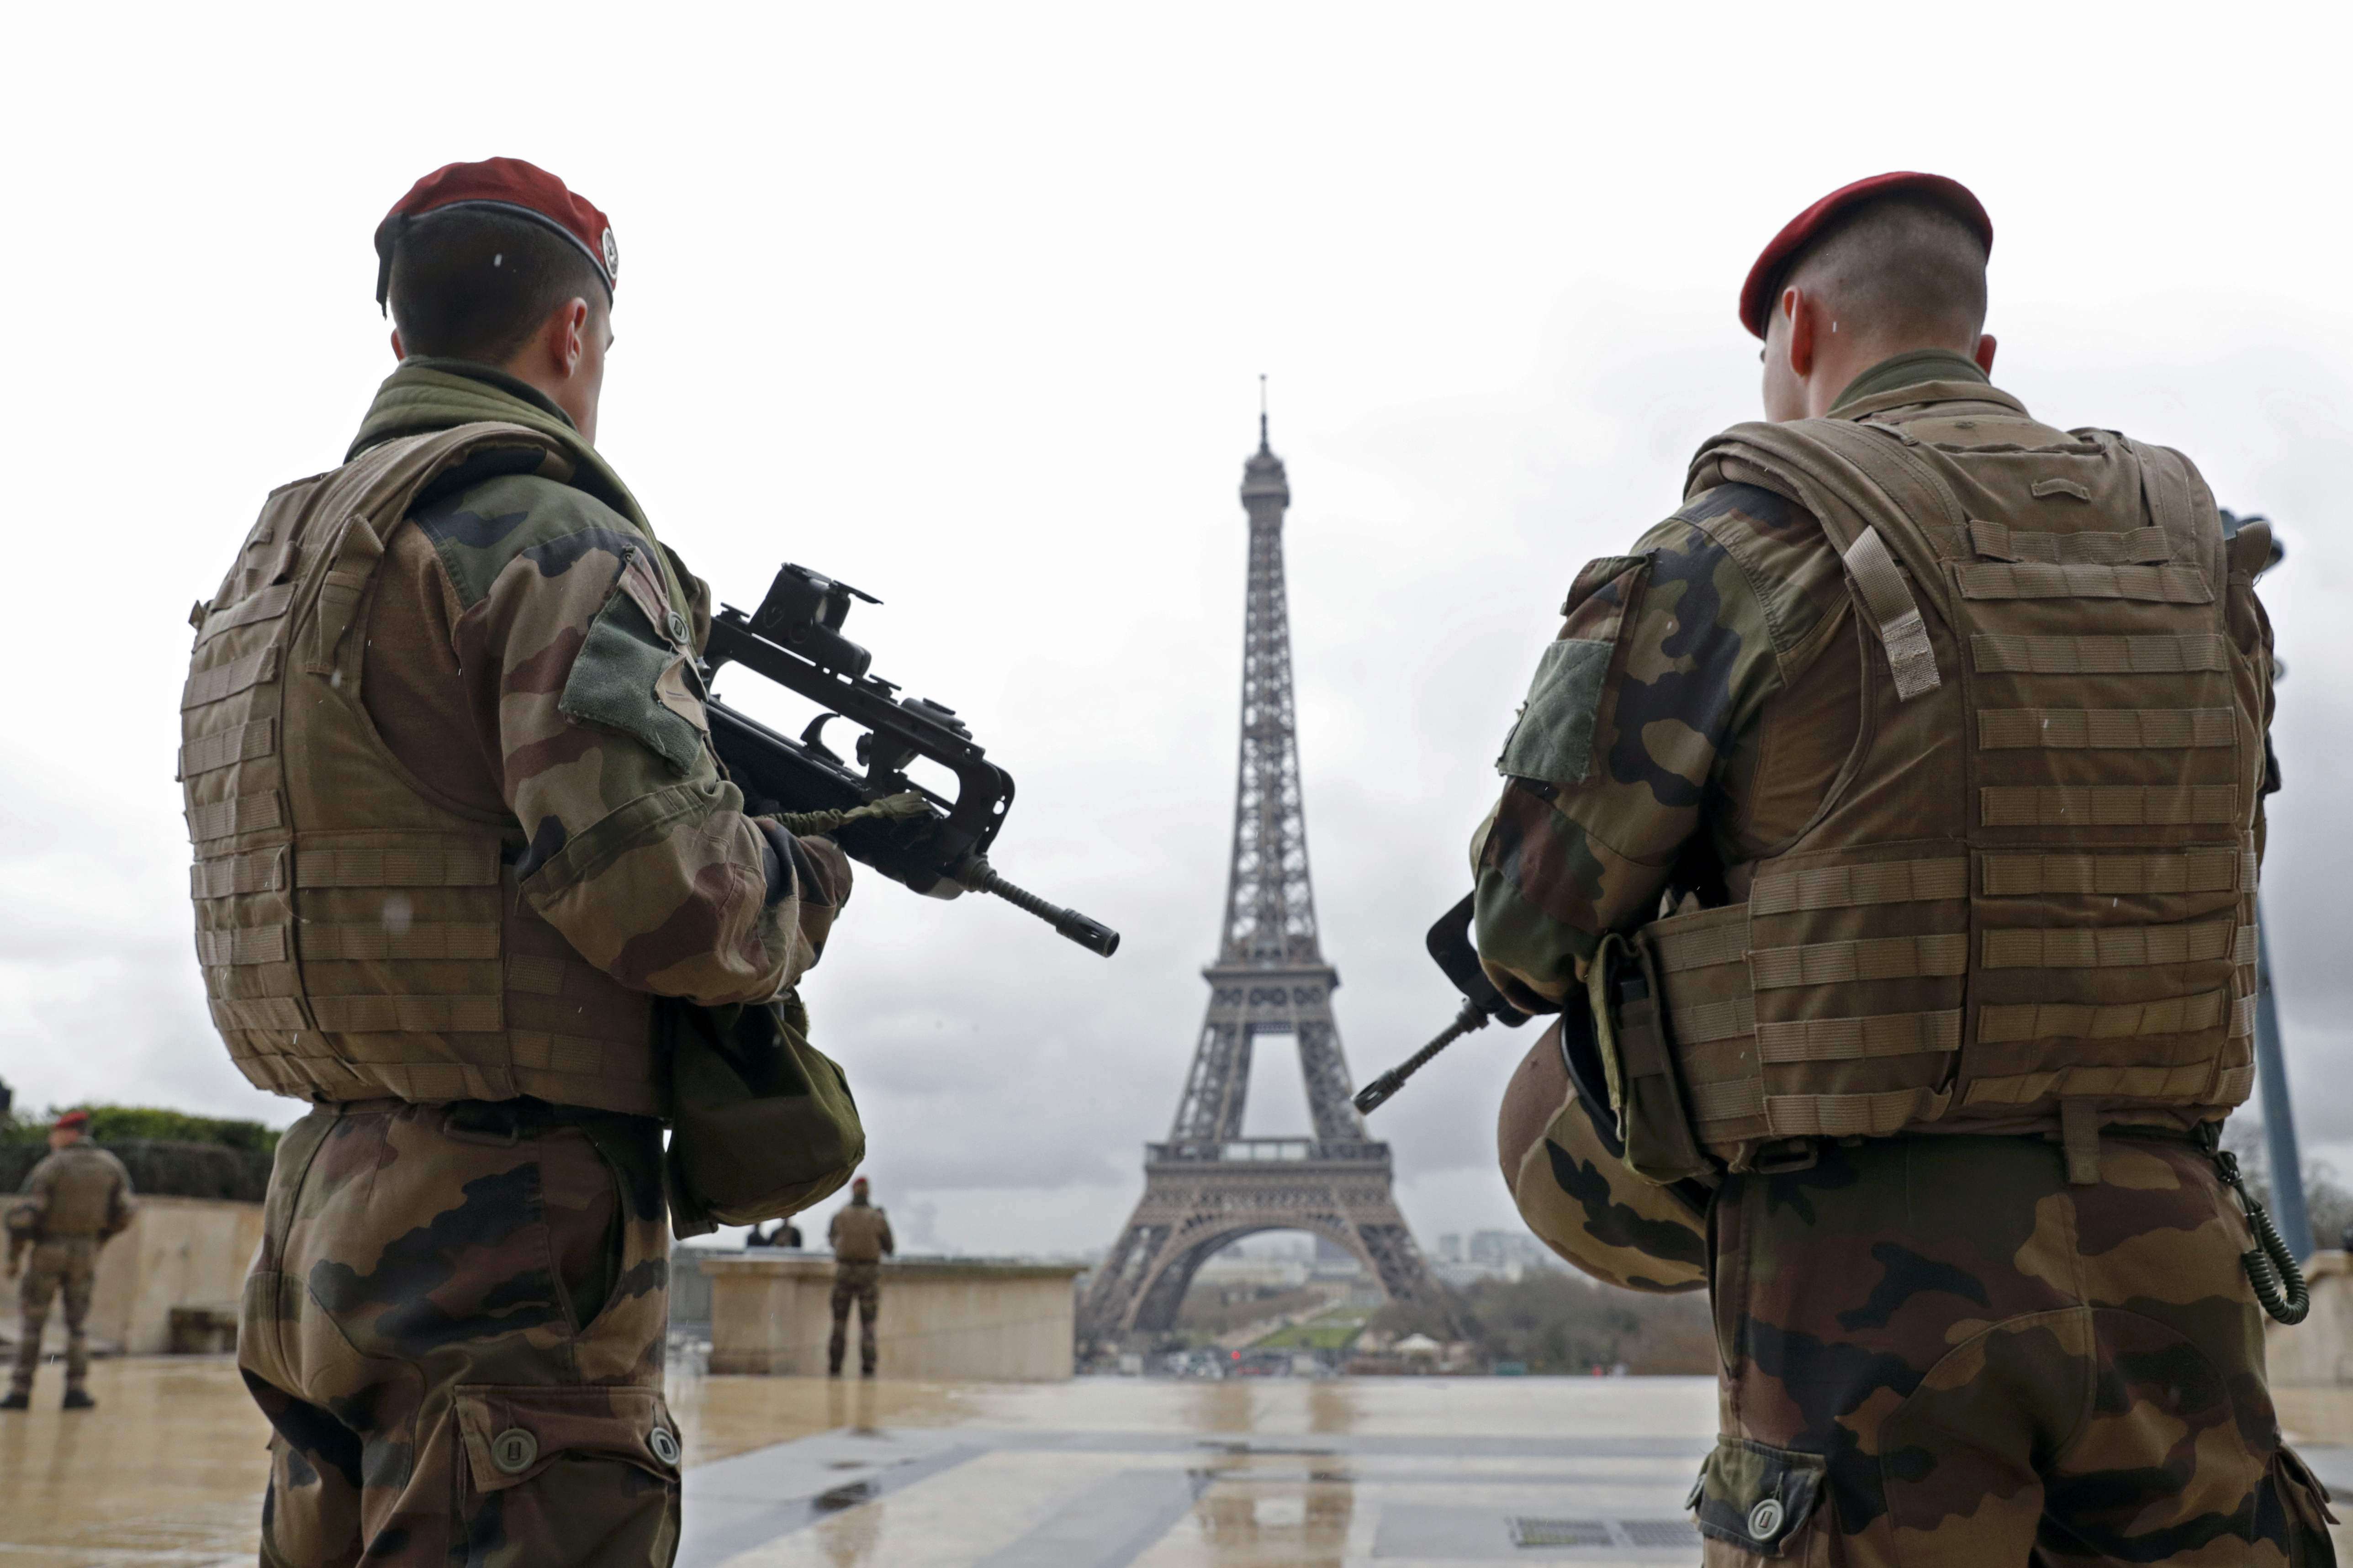 French army paratroopers patrol near the Eiffel Tower in Paris, France, in this picture taken on March 30, 2016. The French government will propose extending the country's state of emergency until July 15, 2017 due to presidential and parliament elections in spring next year, the French Prime Minister said December 10, 2016. Picture taken on March 30, 2016. REUTERS/Philippe Wojazer/File Photo